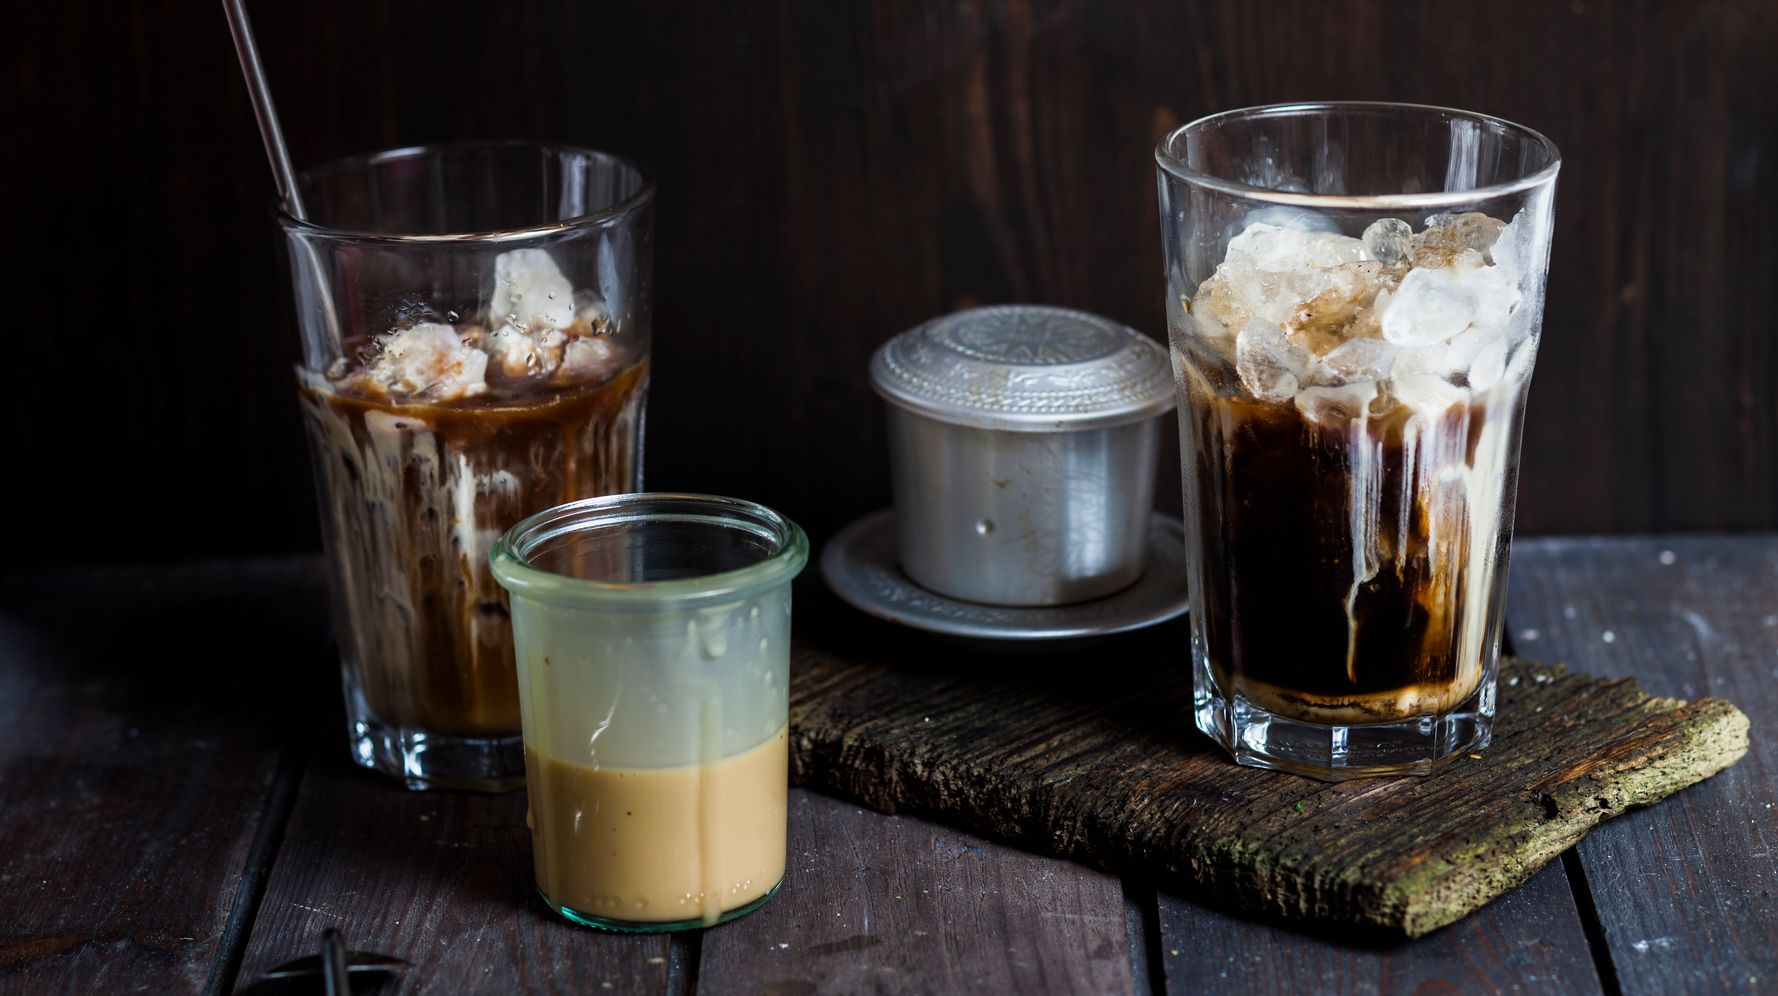 How Long Will Your Fancy Leftover Iced Coffee Last In The Fridge?